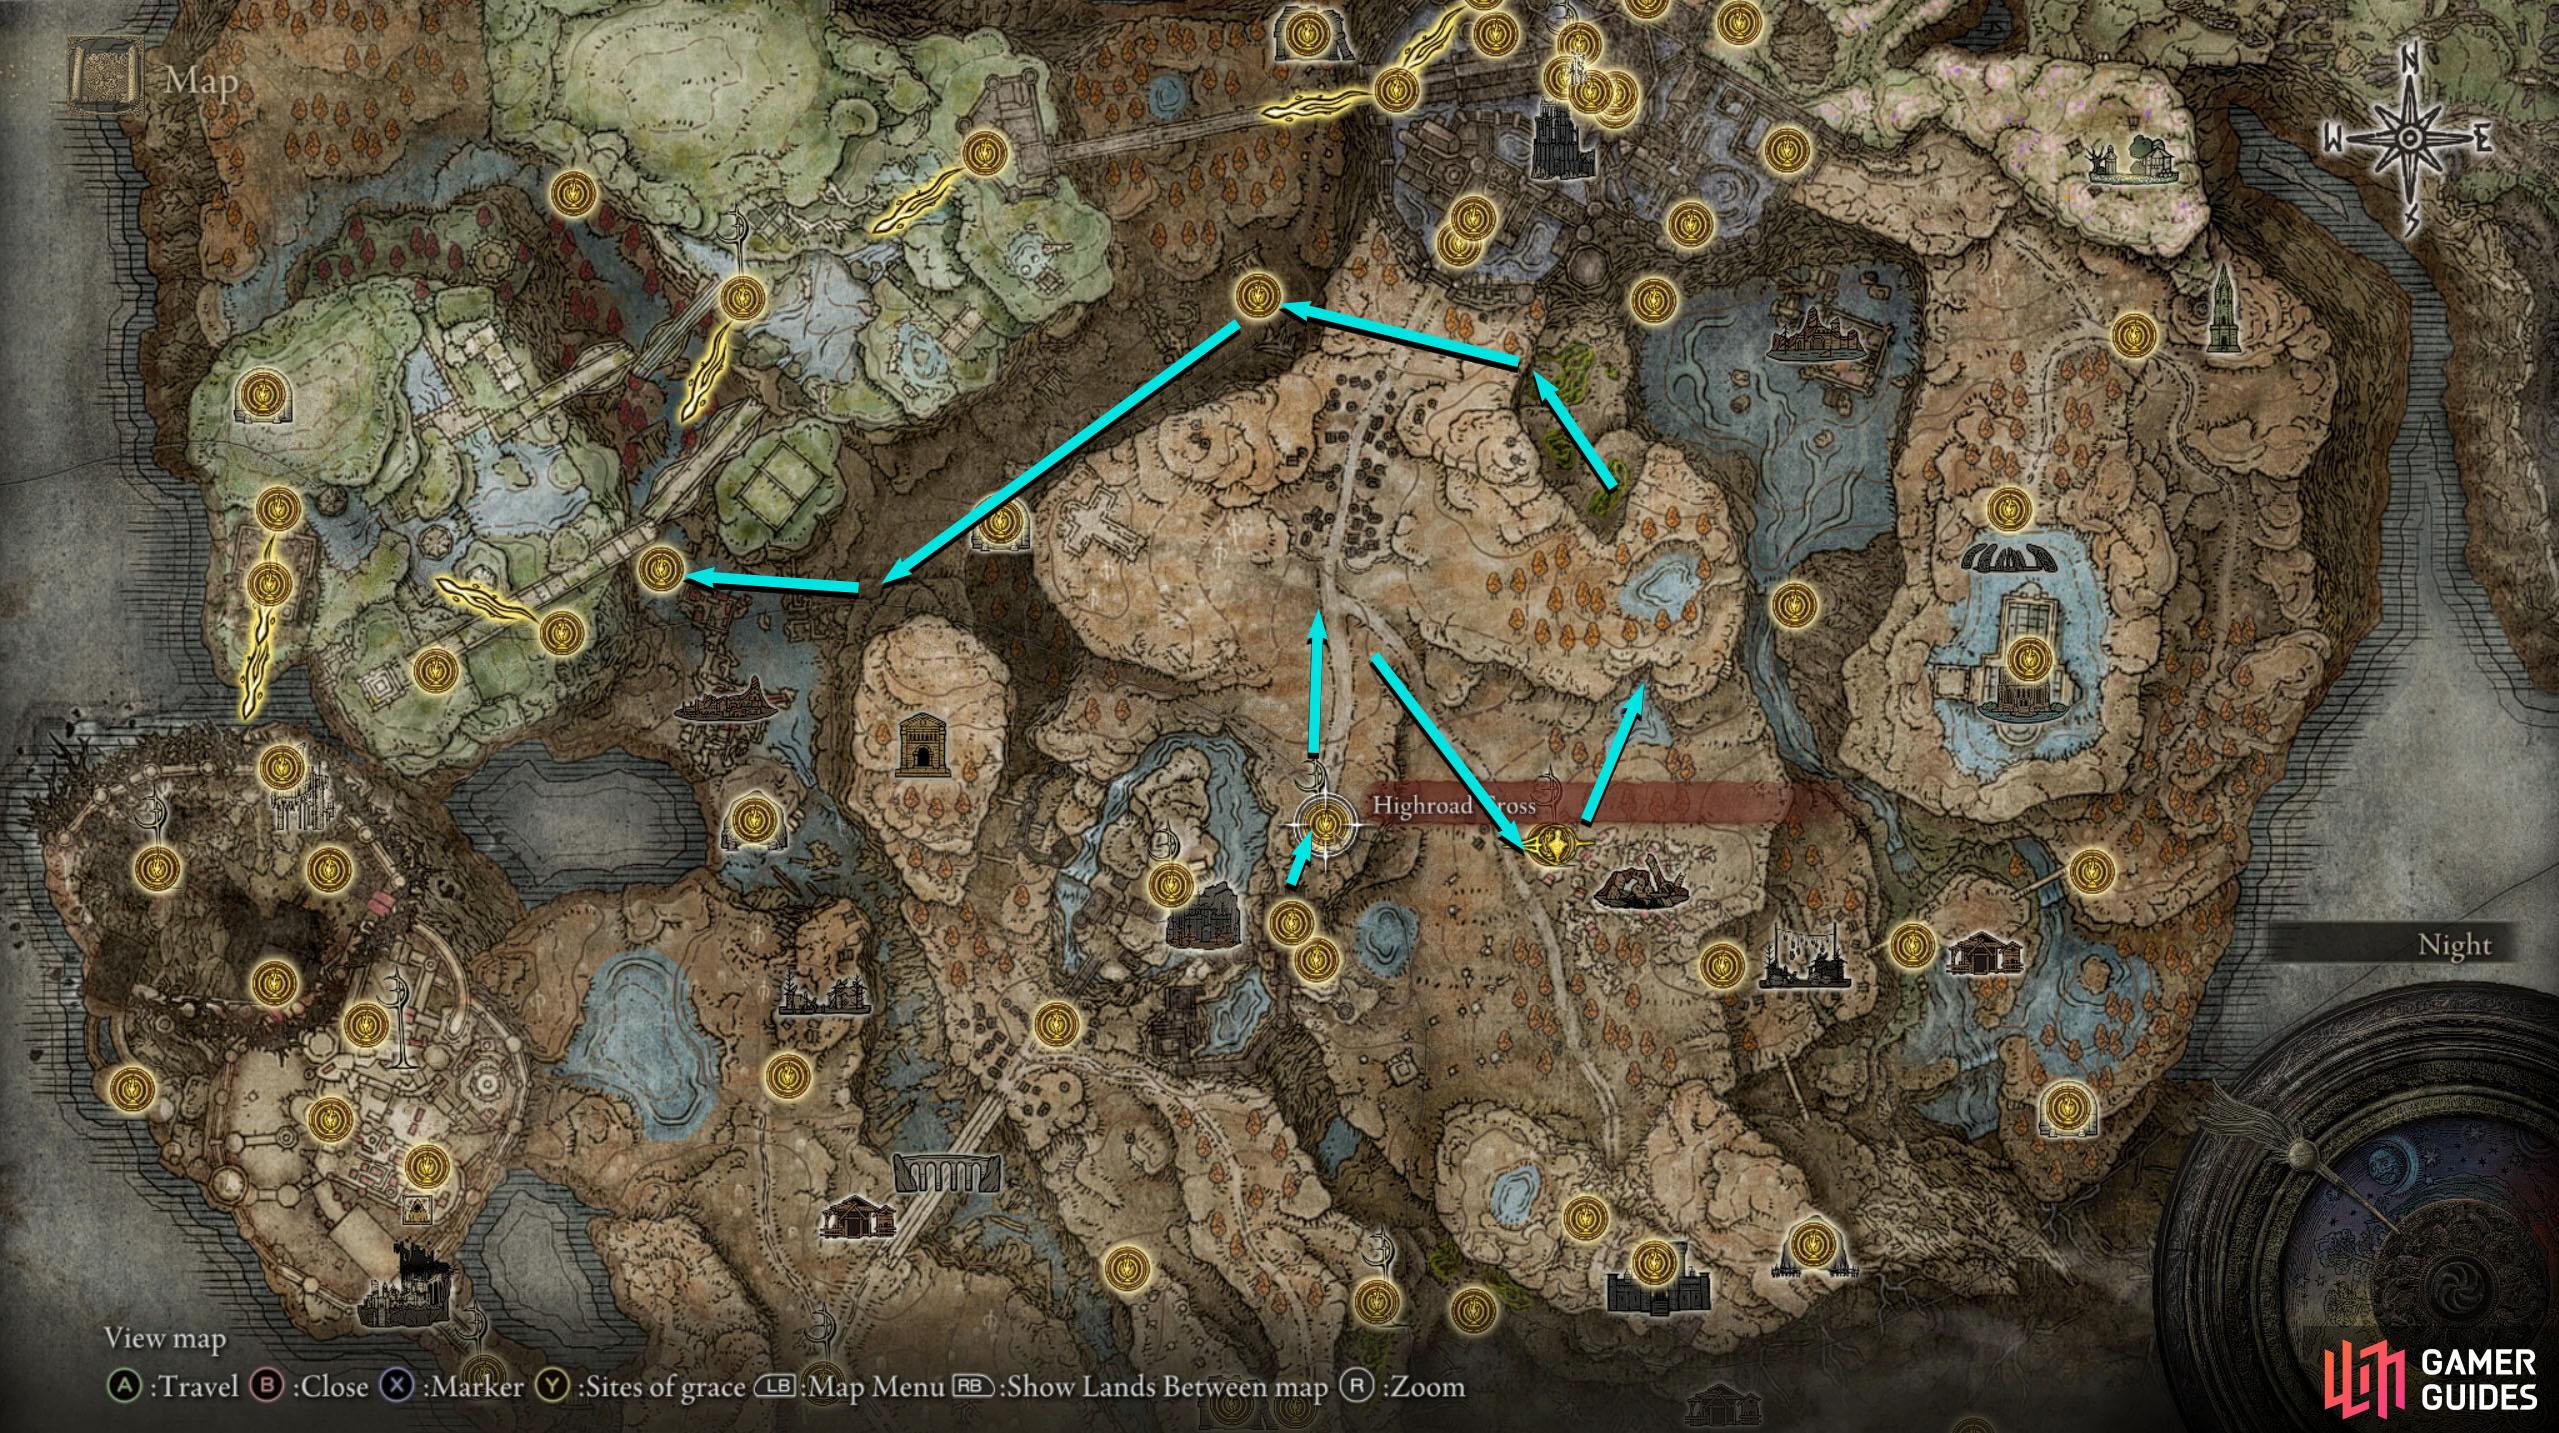 You’ll need to go through a cave northwest of Moorth Ruins to reach Temple Town Ruins.